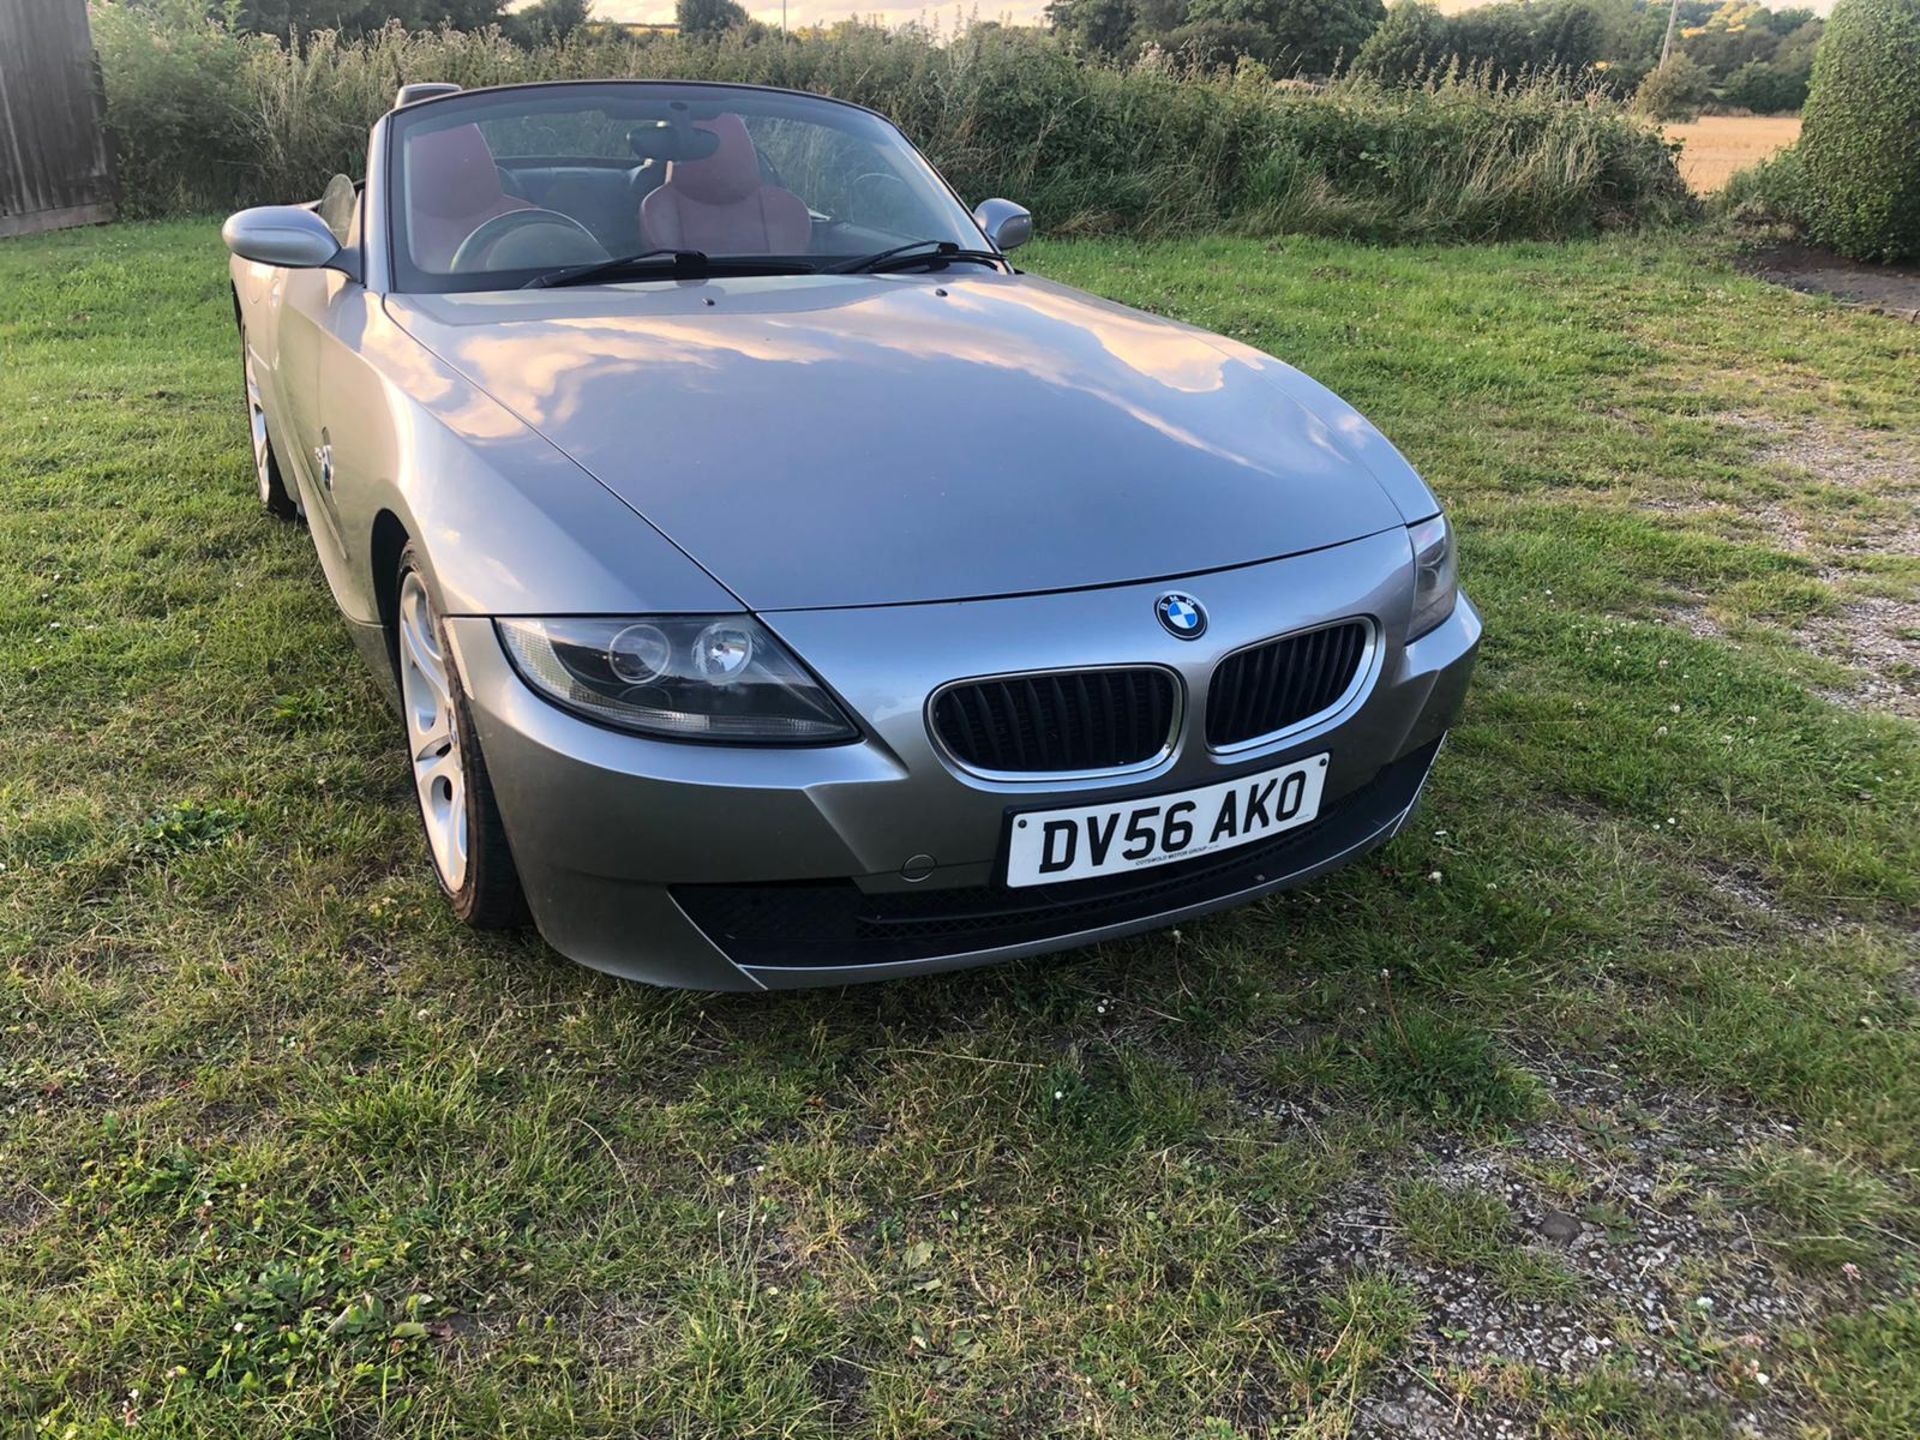 2006/56 REG BMW Z4 SPORT 2.0 PETROL GREY CONVERTIBLE, SHOWING 4 FORMER KEEPERS *NO VAT* - Image 2 of 16